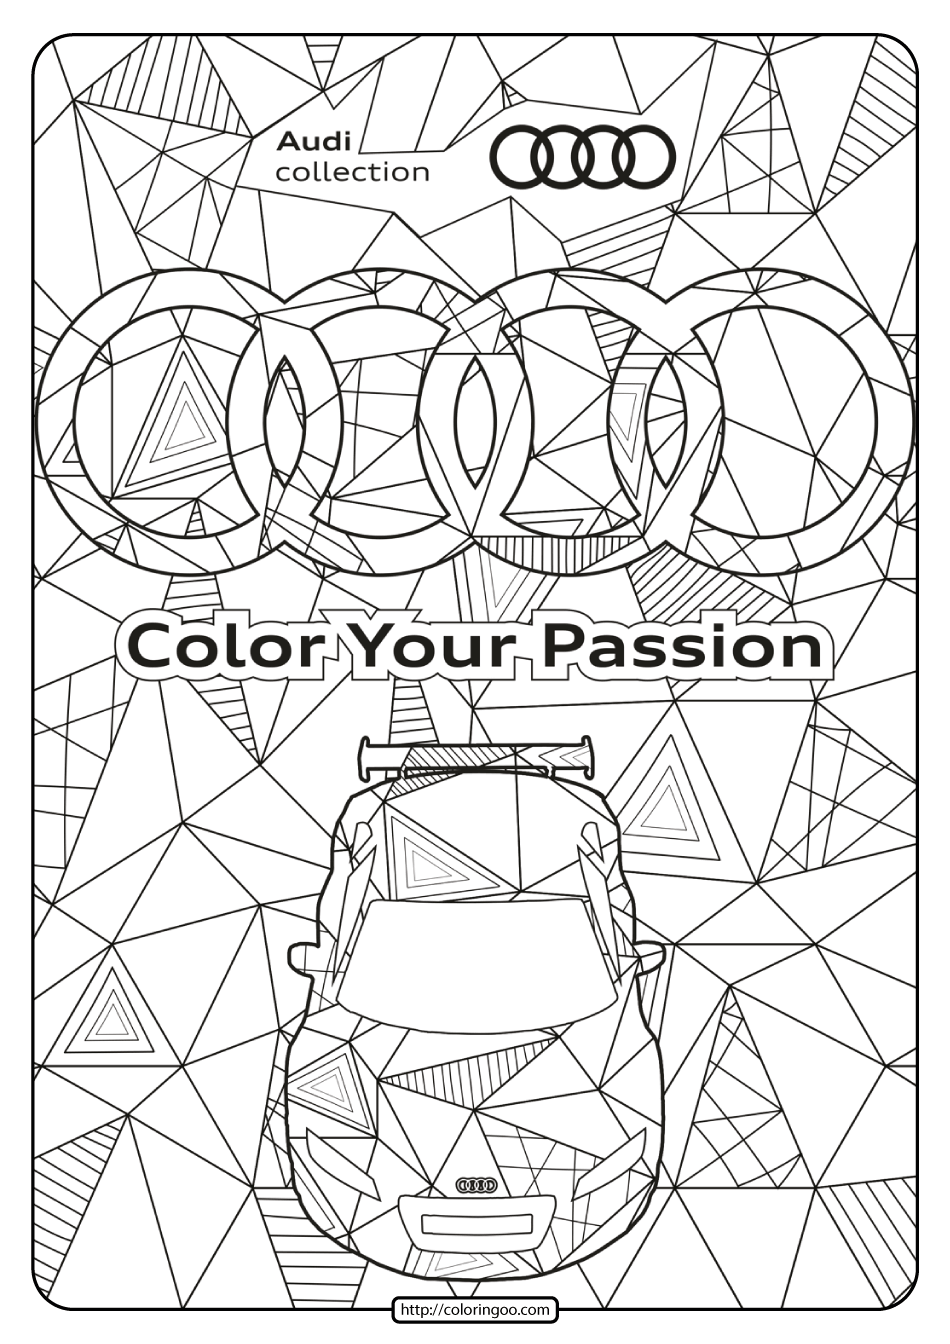 Printable Audi Cars Coloring Book & Page – 01